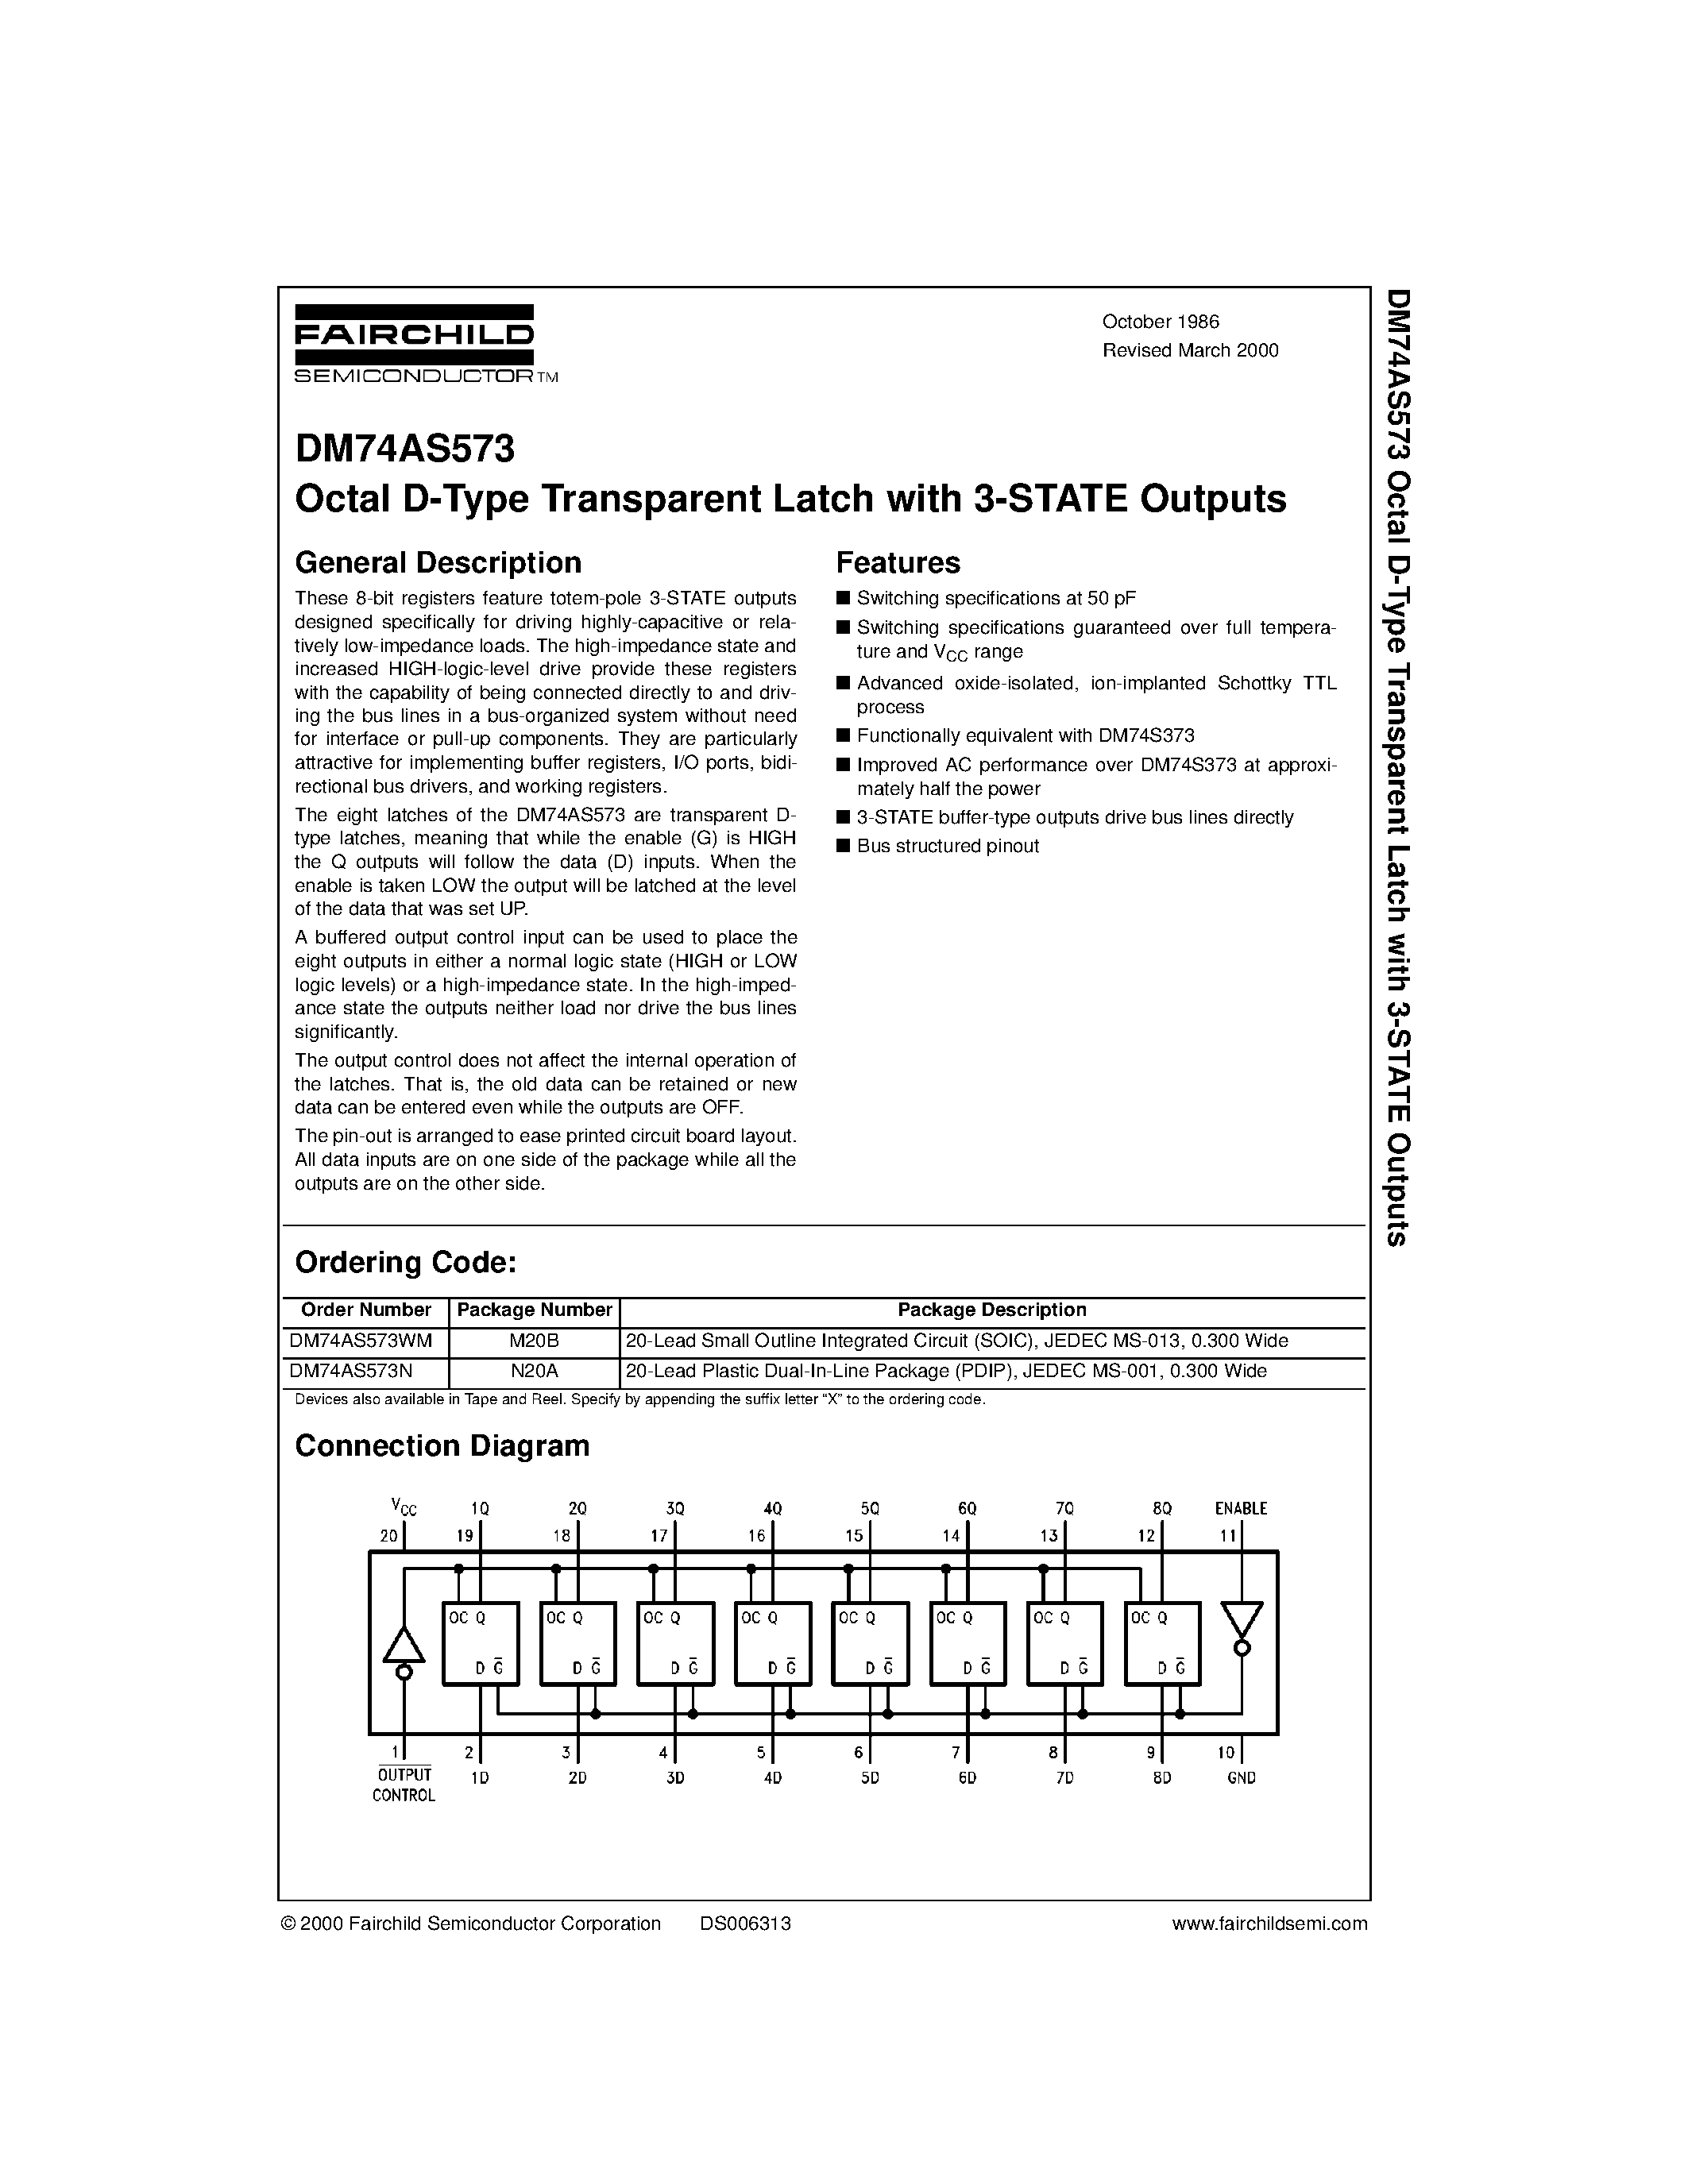 Datasheet DM74AS573 - Octal D-Type Transparent Latch with 3-STATE Outputs page 1